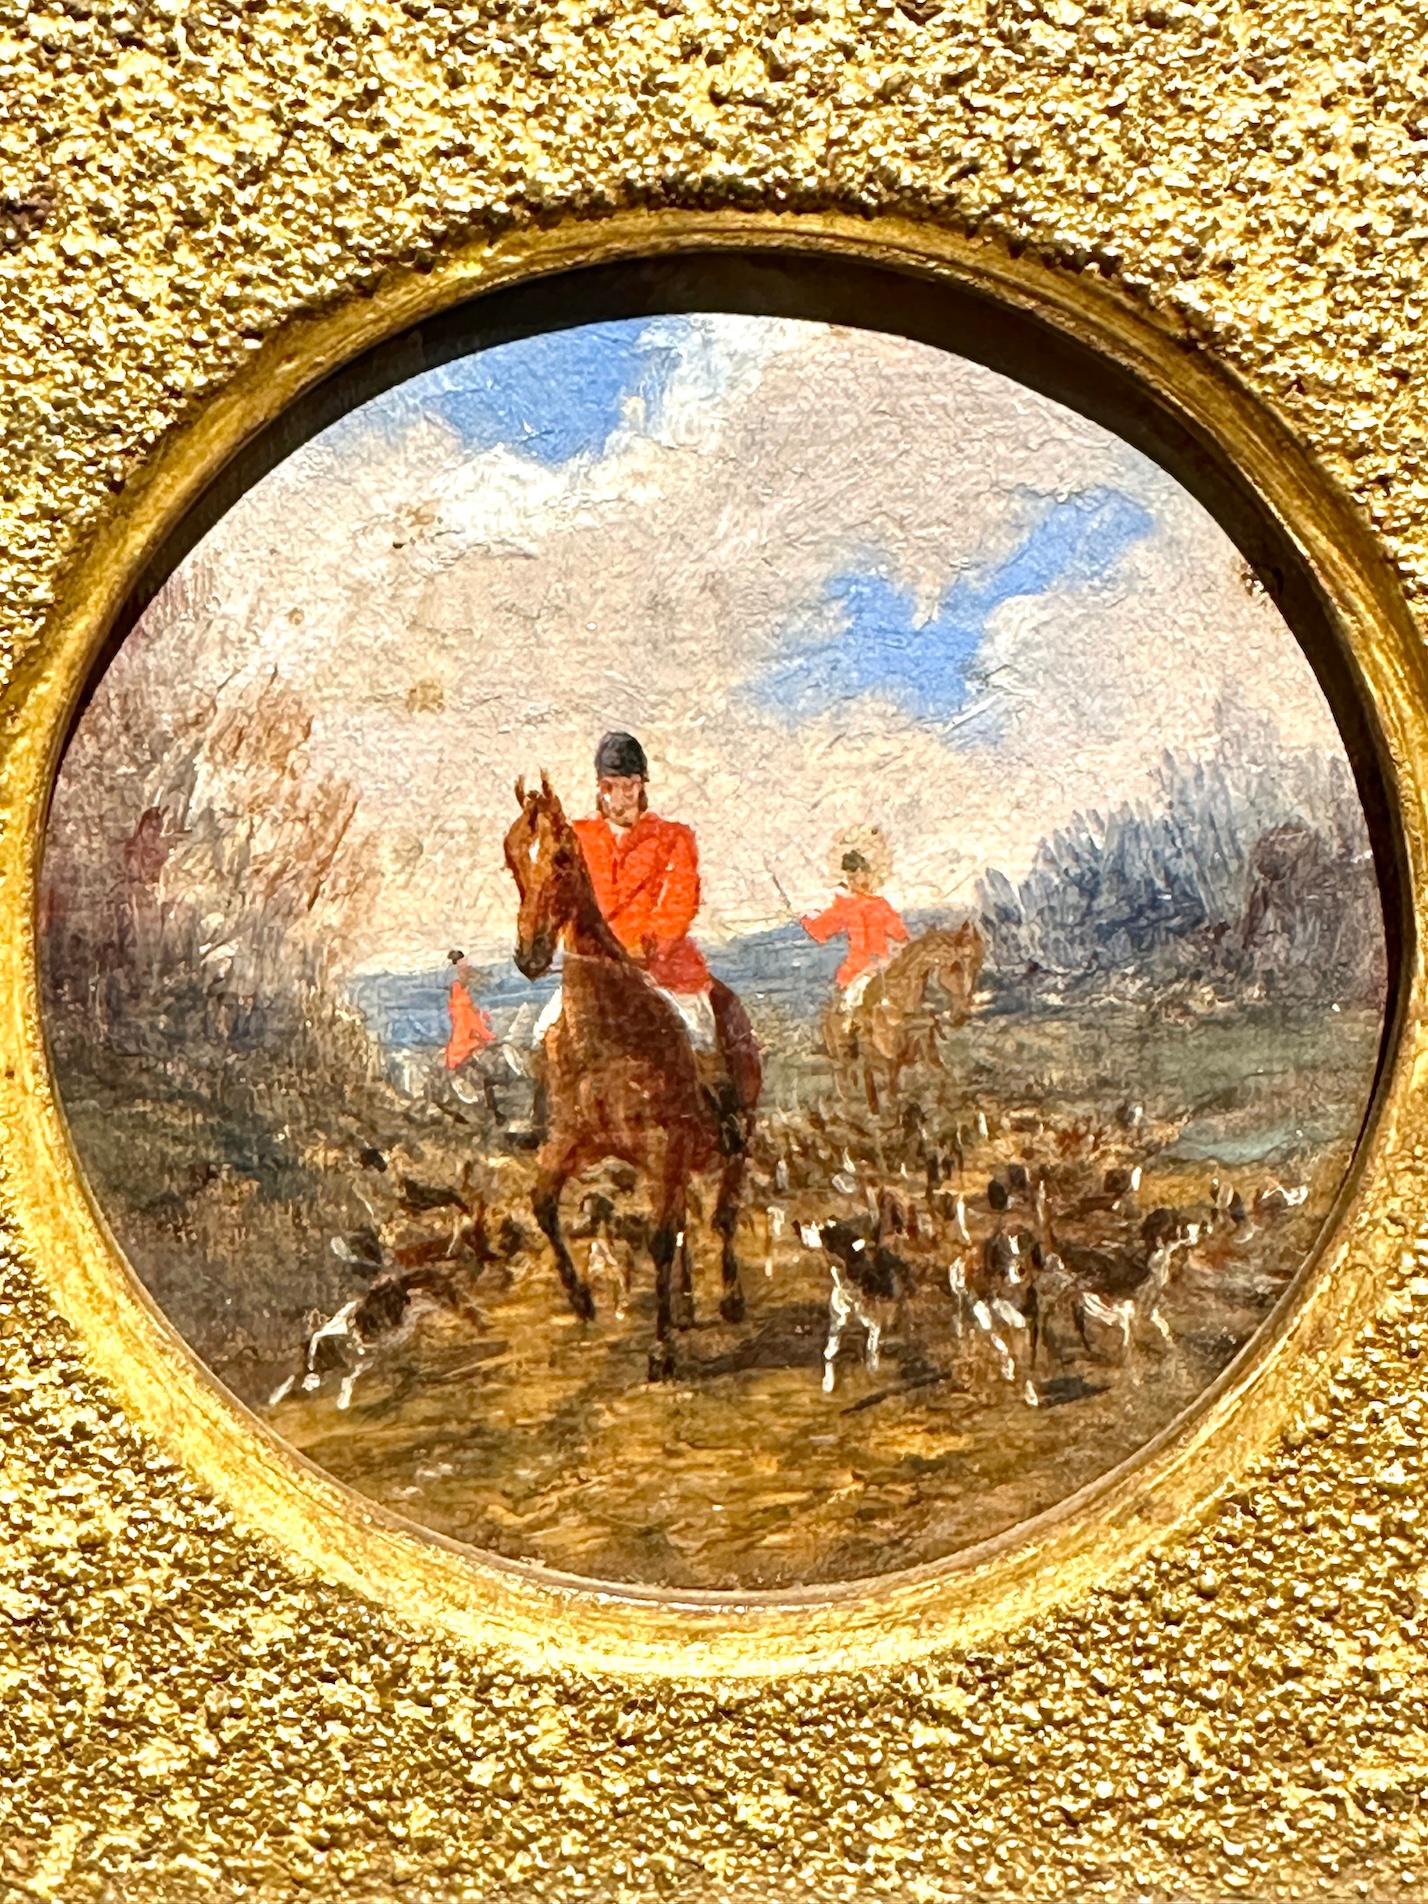 Antique 19th century English, pair of Huntsman riding with hounds in a landscape - Victorian Painting by John Frederick Herring Jr.